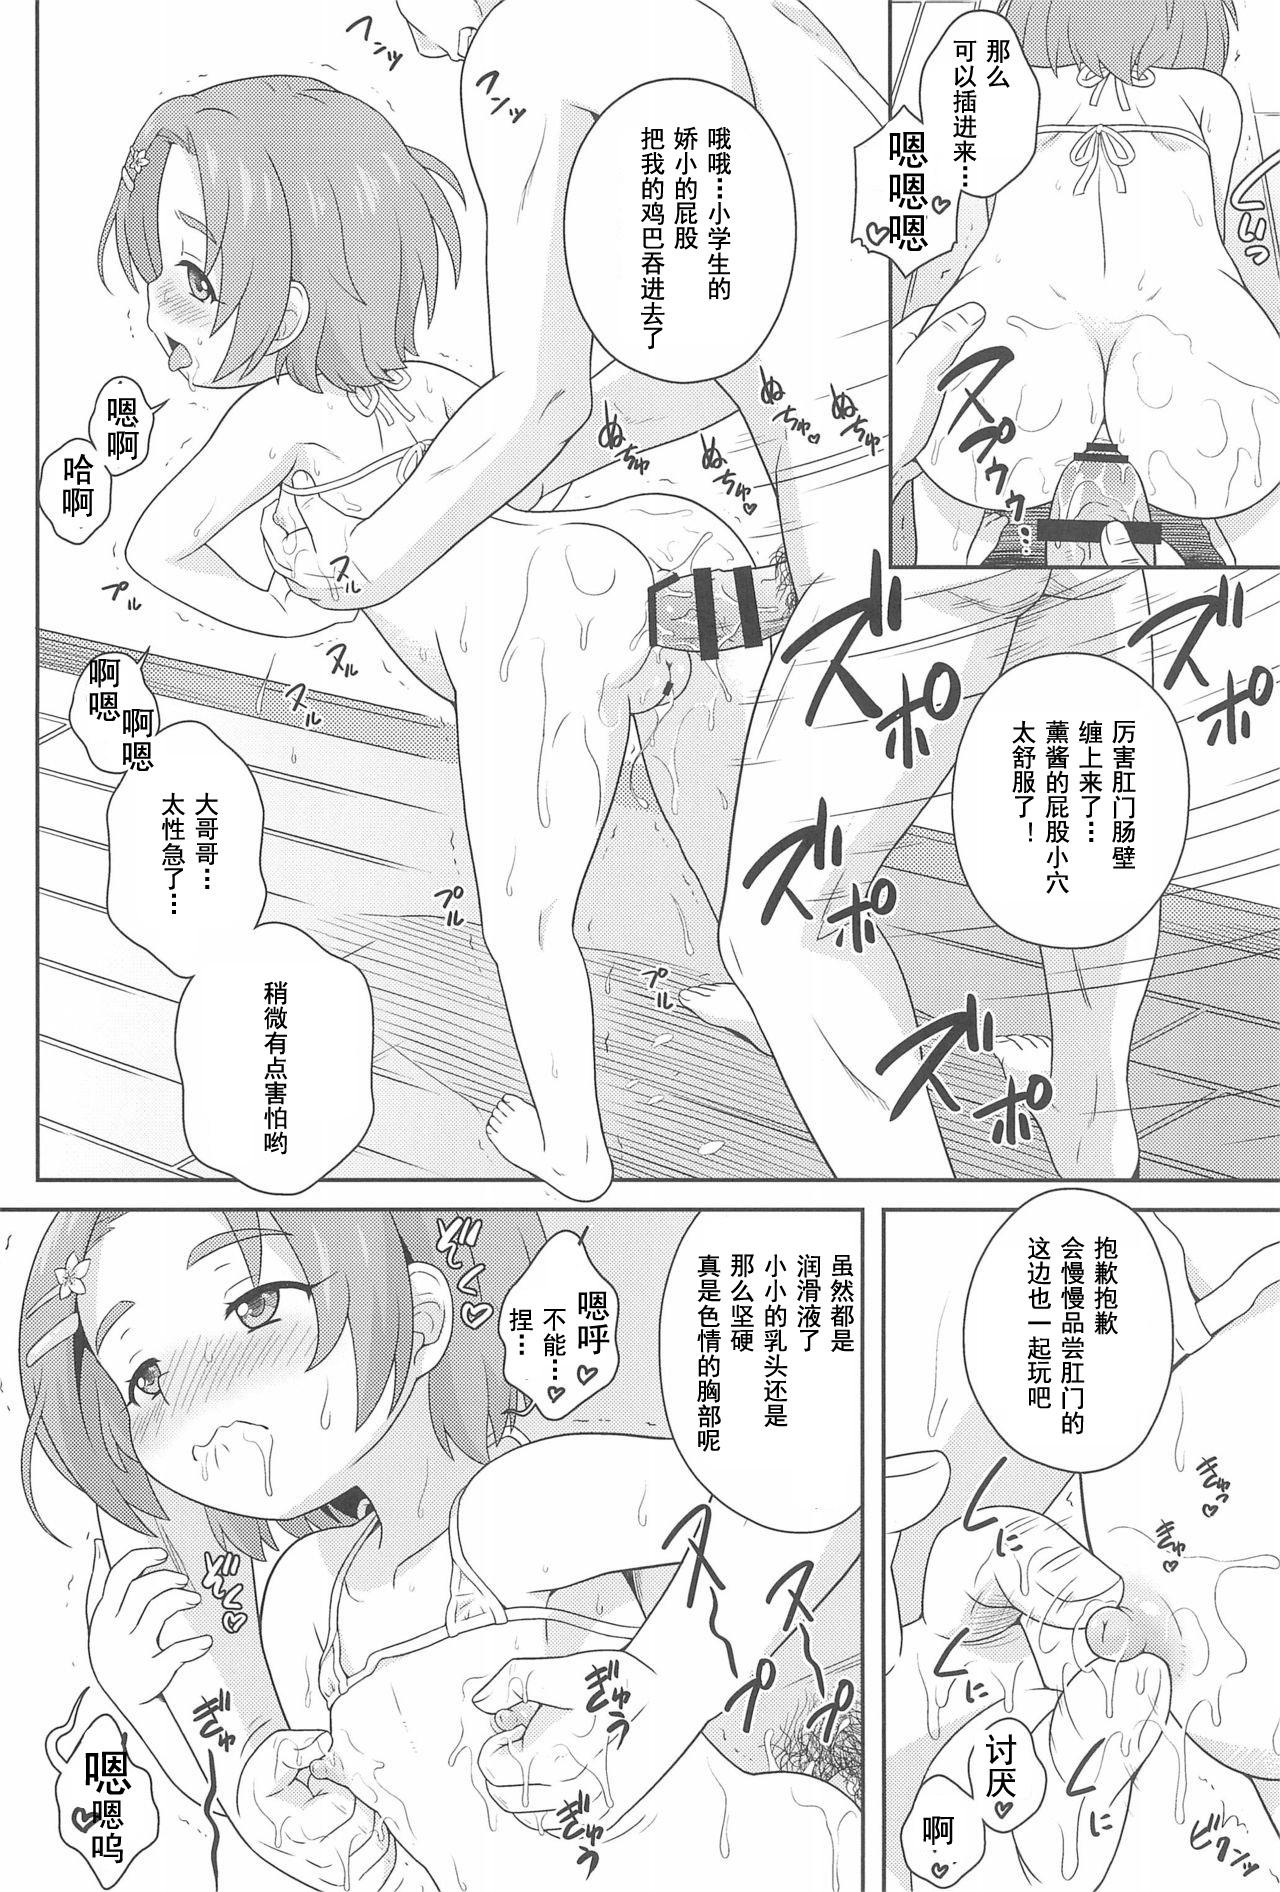 Nalgas Delivery Days Futsukame→ - The idolmaster Sex Toy - Page 8